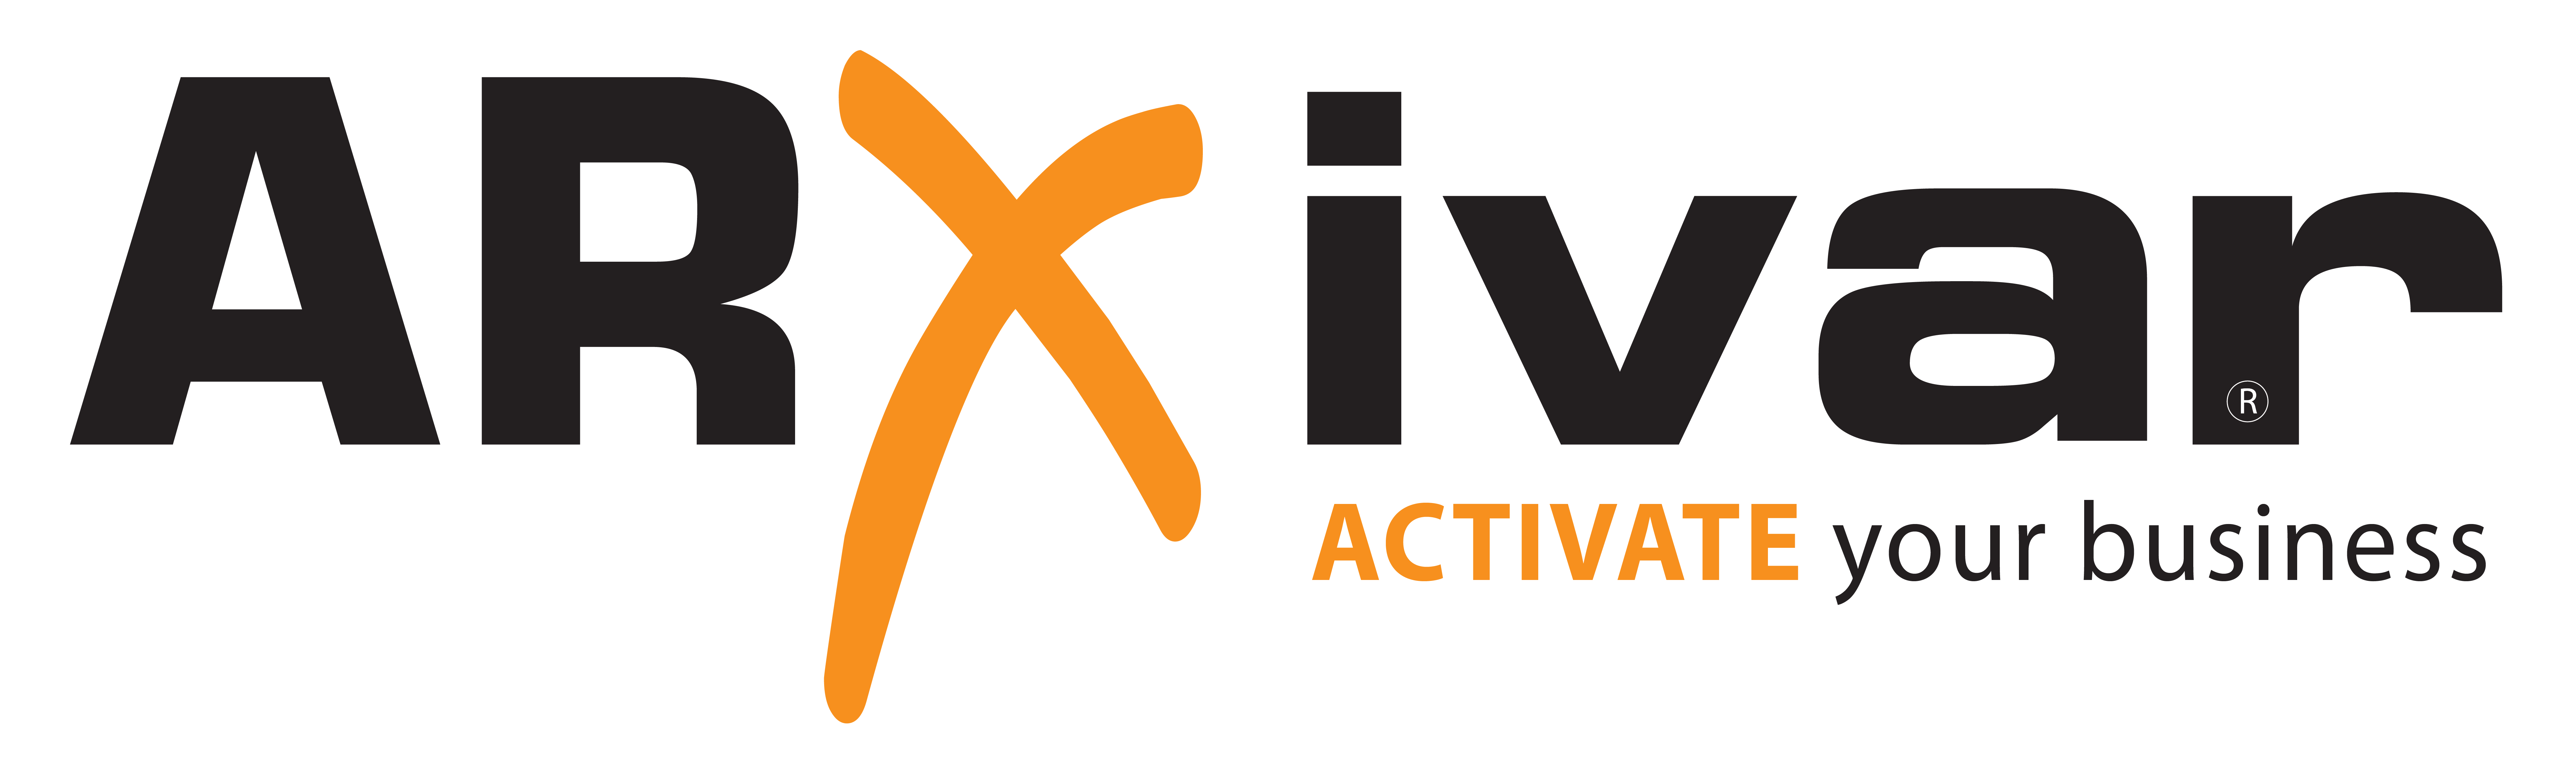 2017 Logo activate your business.png